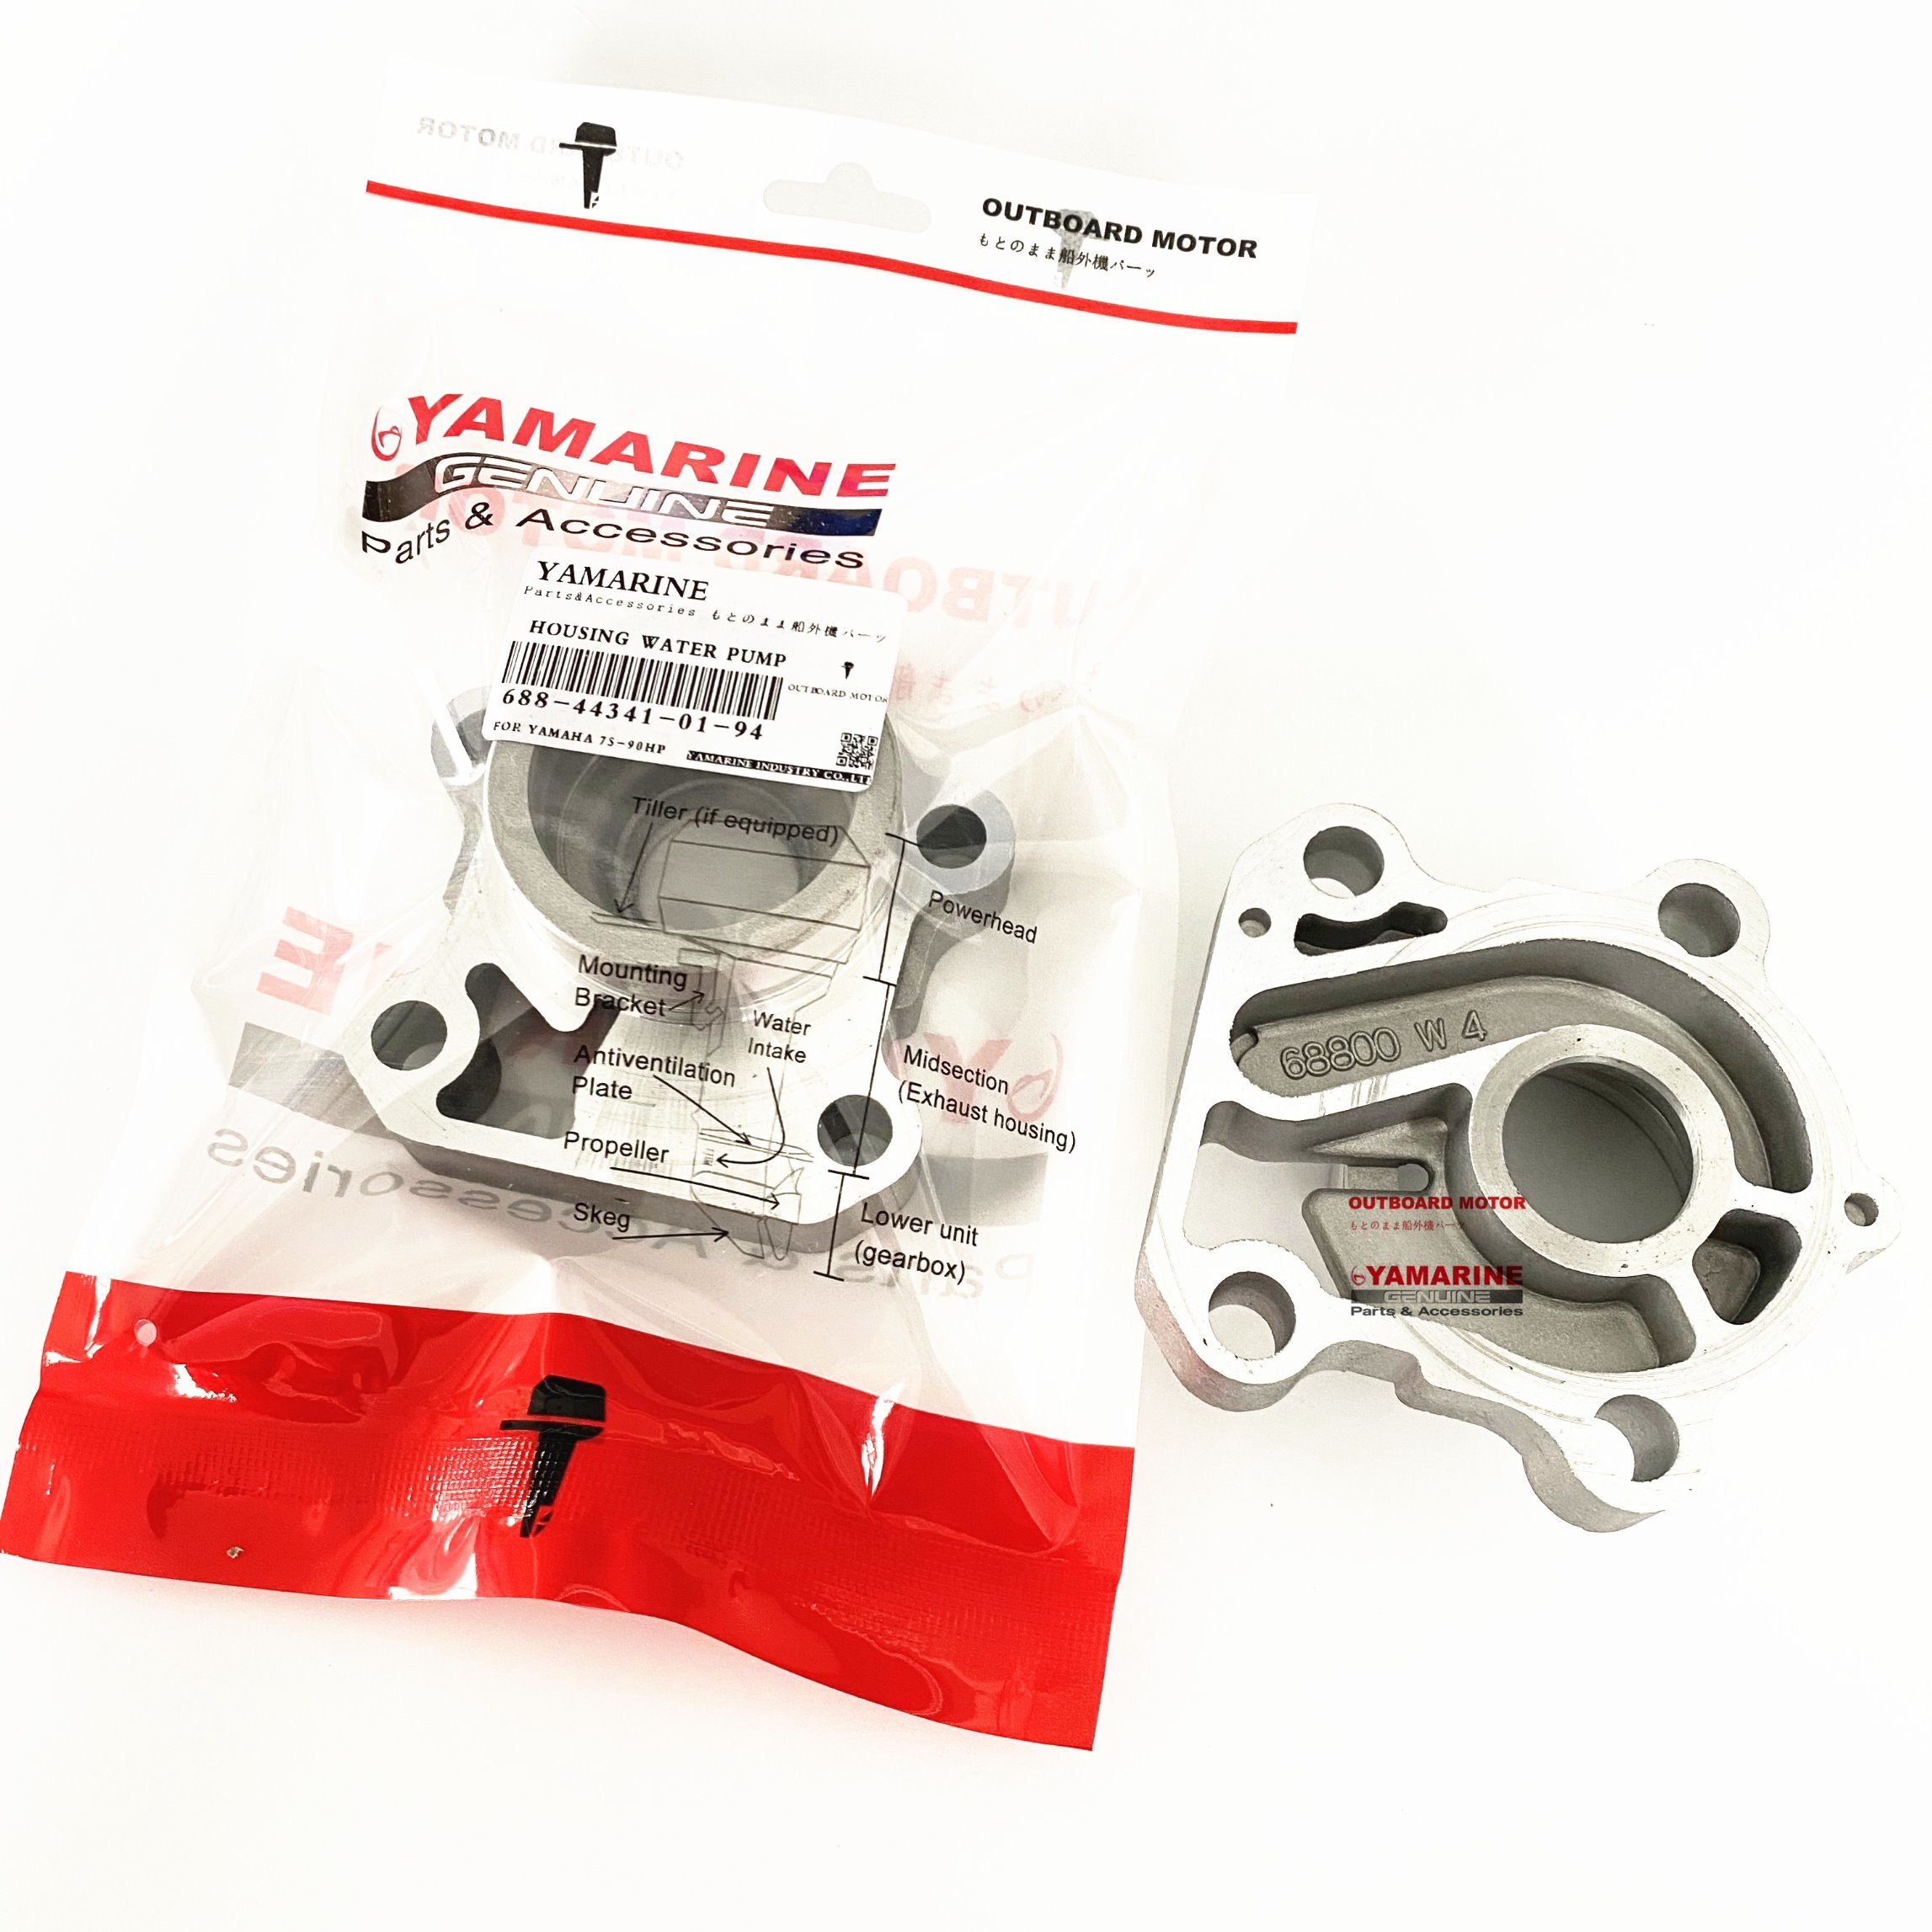 YAMAHA 75HP/85HP Outboard Water Pump Housing 688-44341-01-94, 688-44341-00-94 for 50-70 C 75HP 85HP 90HP 2/4 Stroke Engine